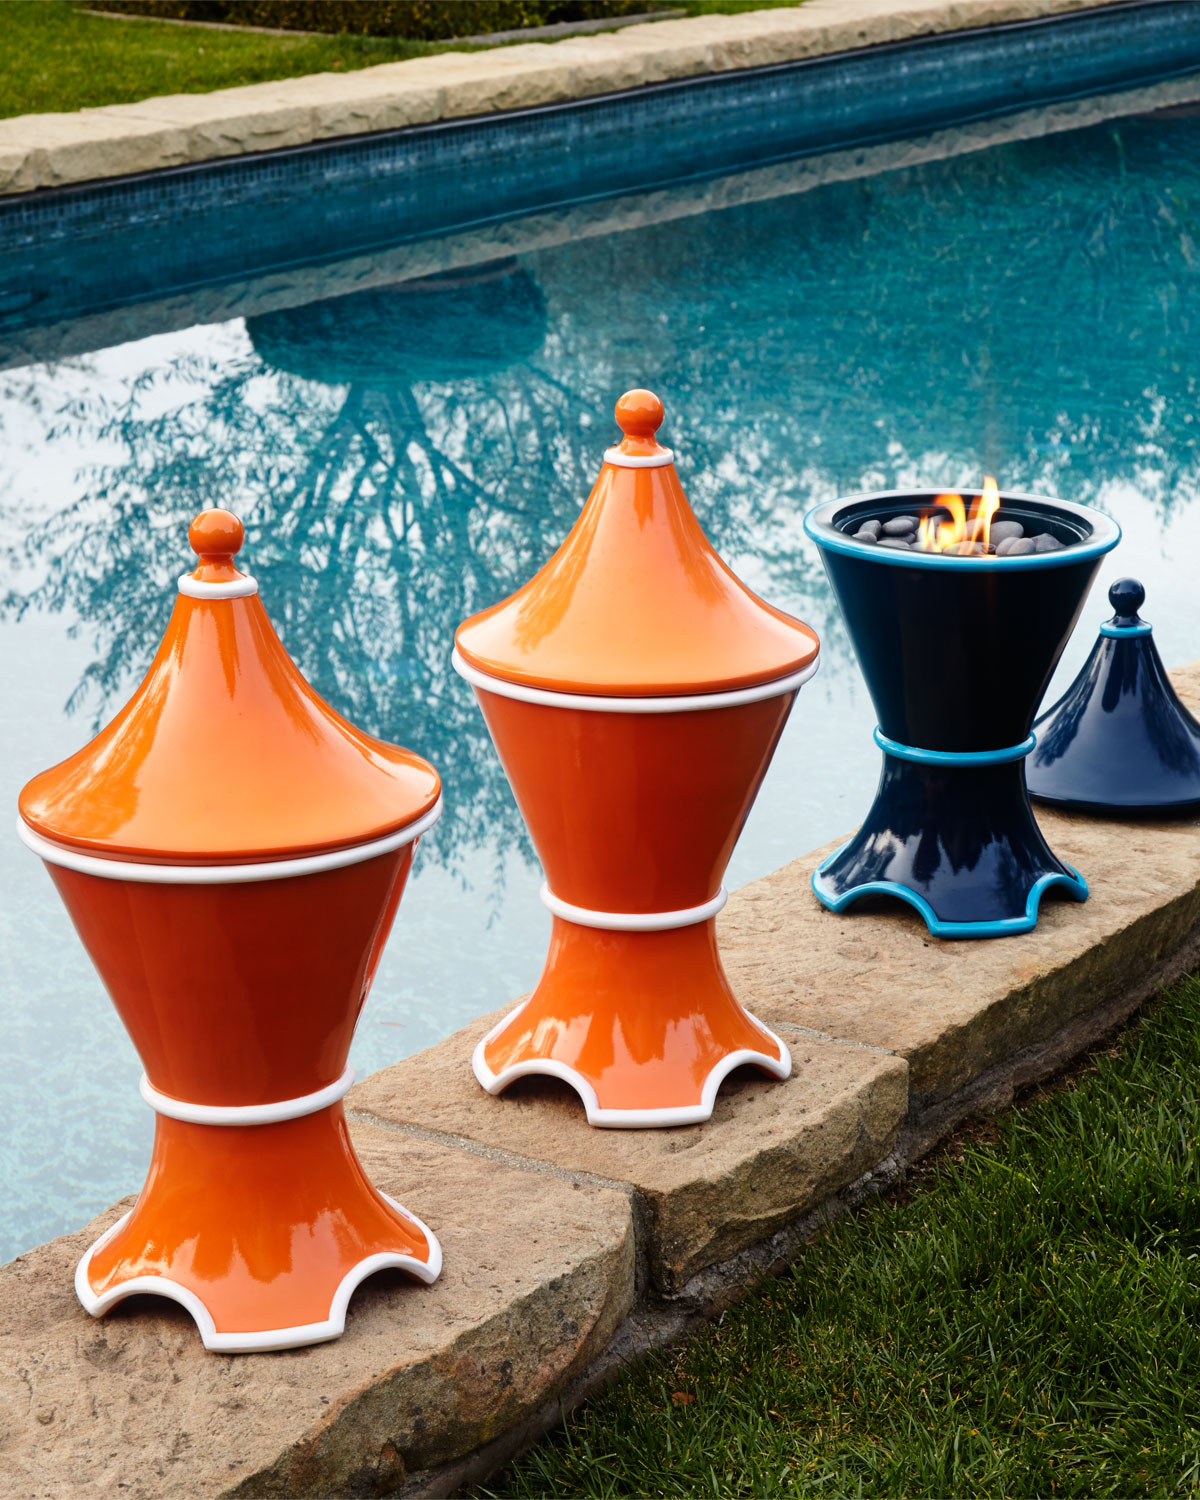 Fire Pit As A Colorful Outdoor Urn, Moroccan Fire Pit